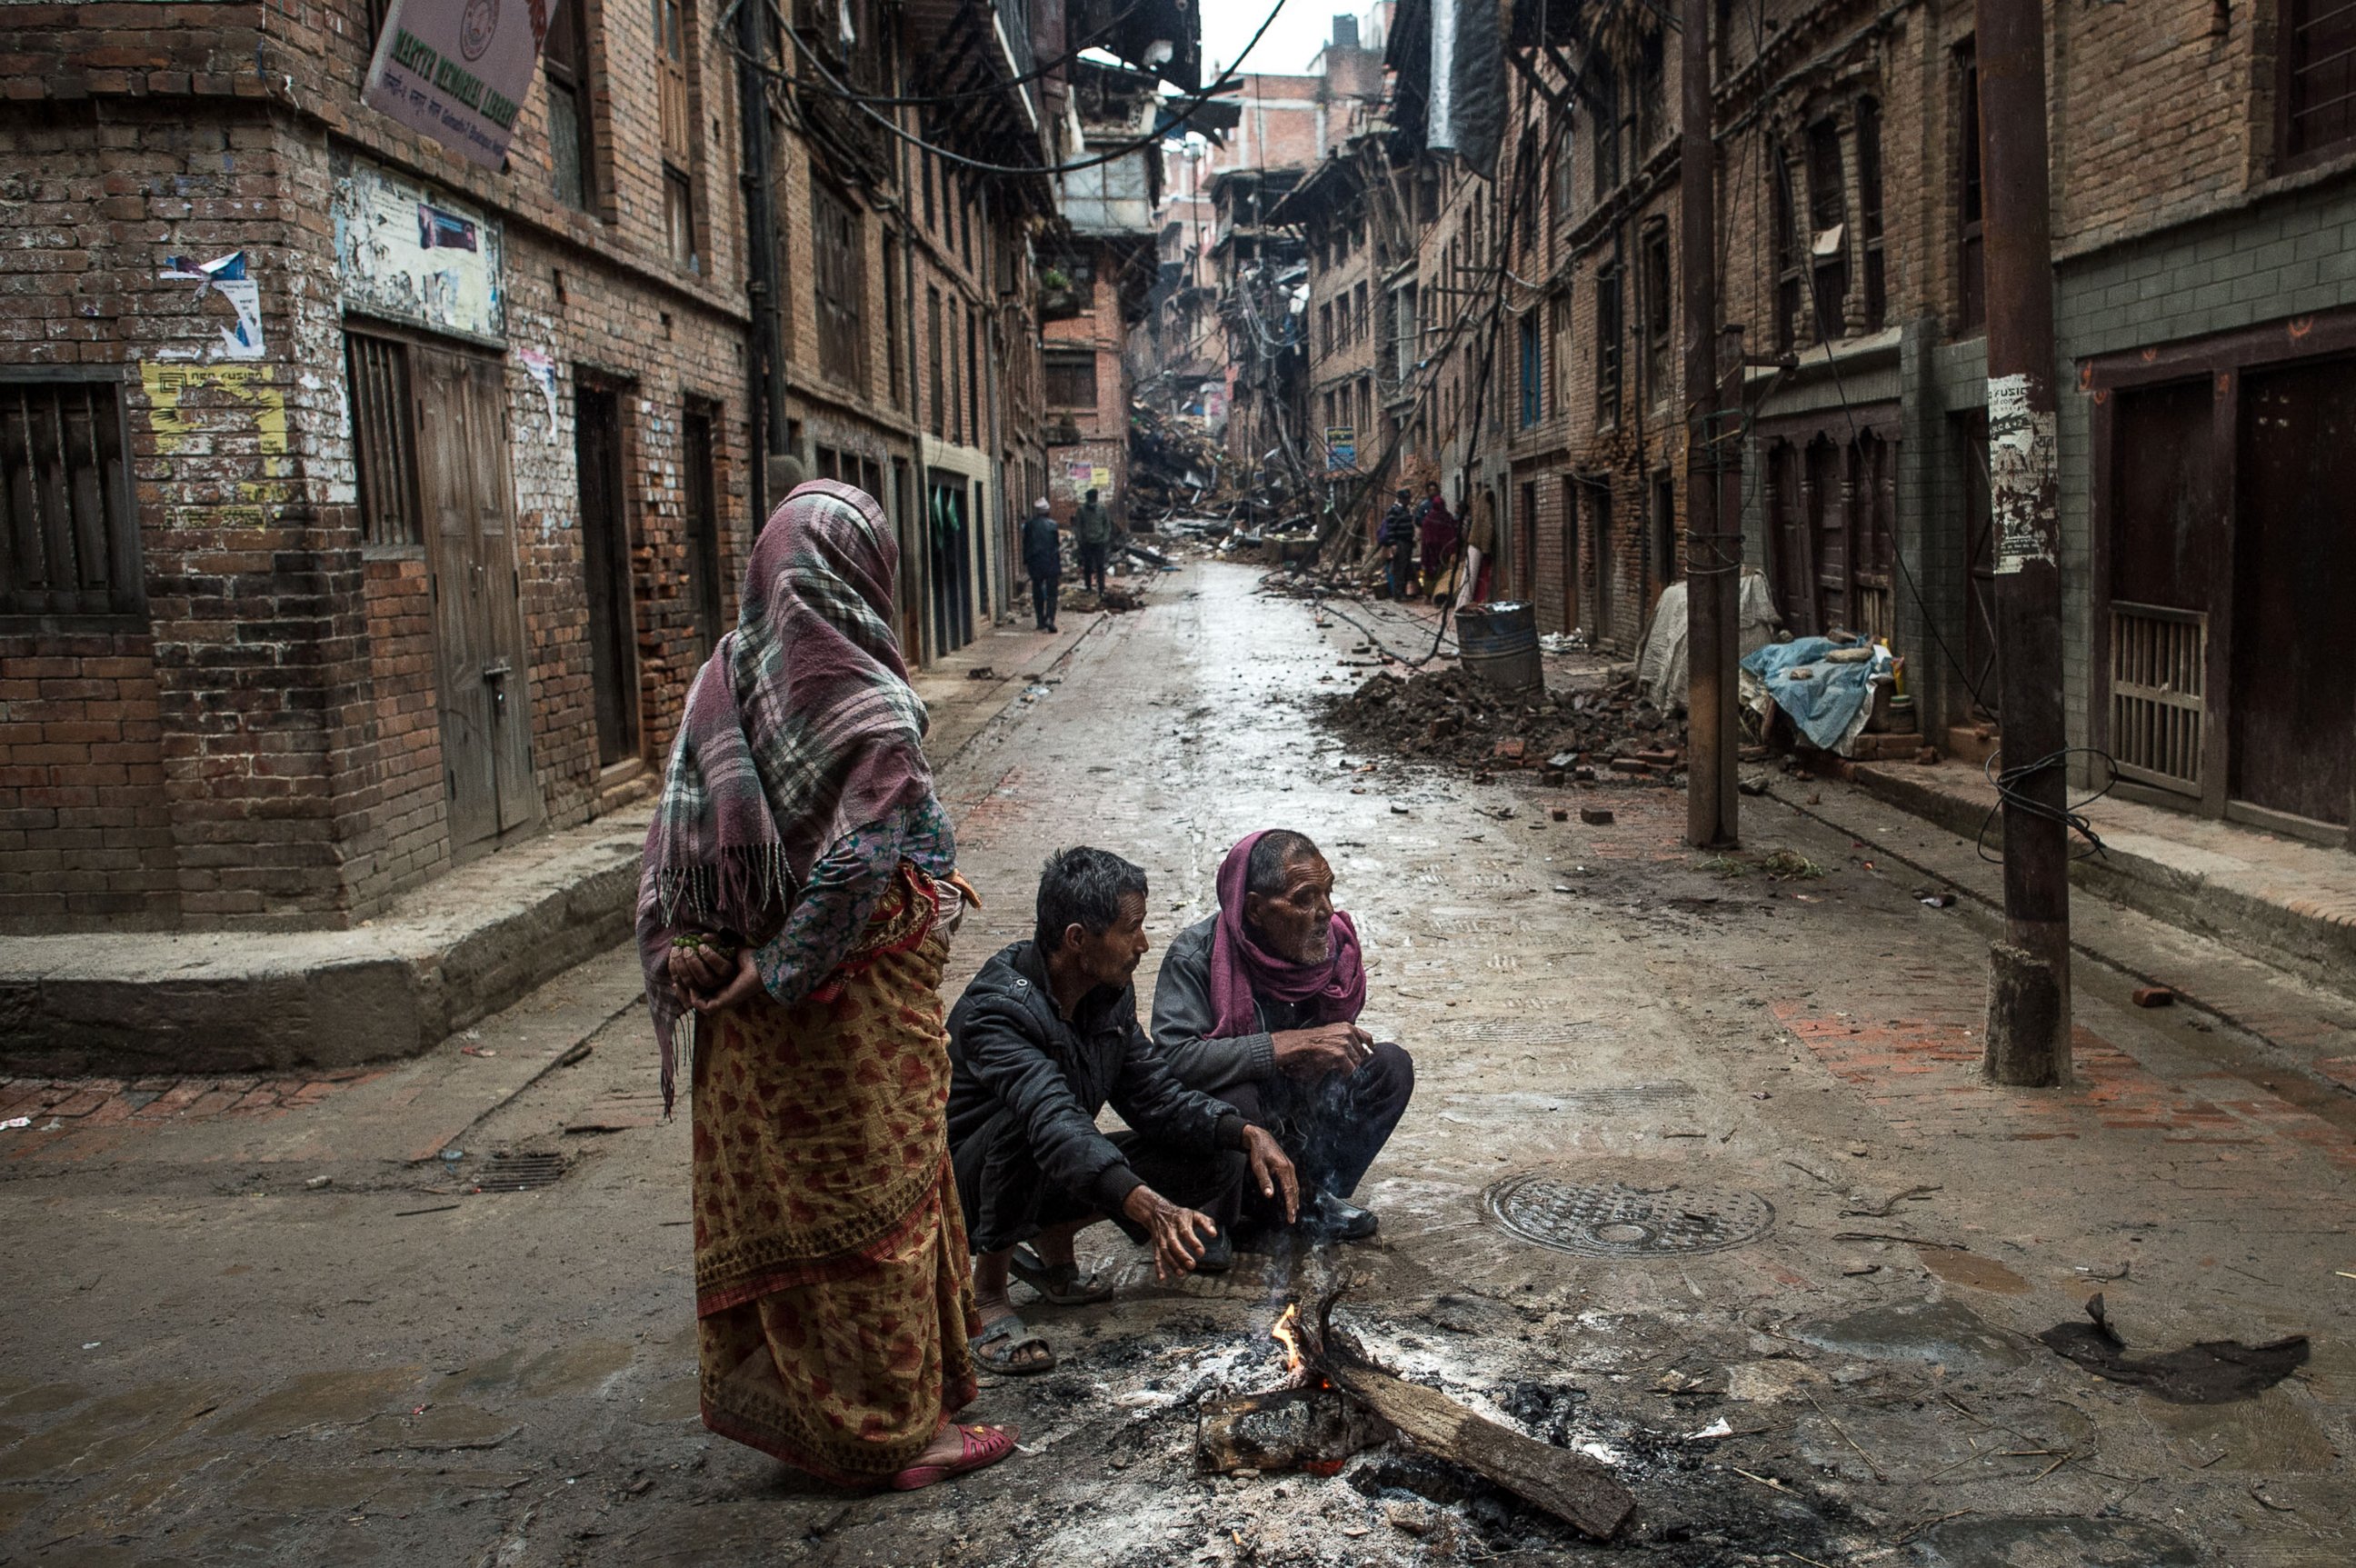 PHOTO: Local residents warm themselves by a fire in the street in Bhaktapur on April 30, 2015 in Kathmandu, Nepal.